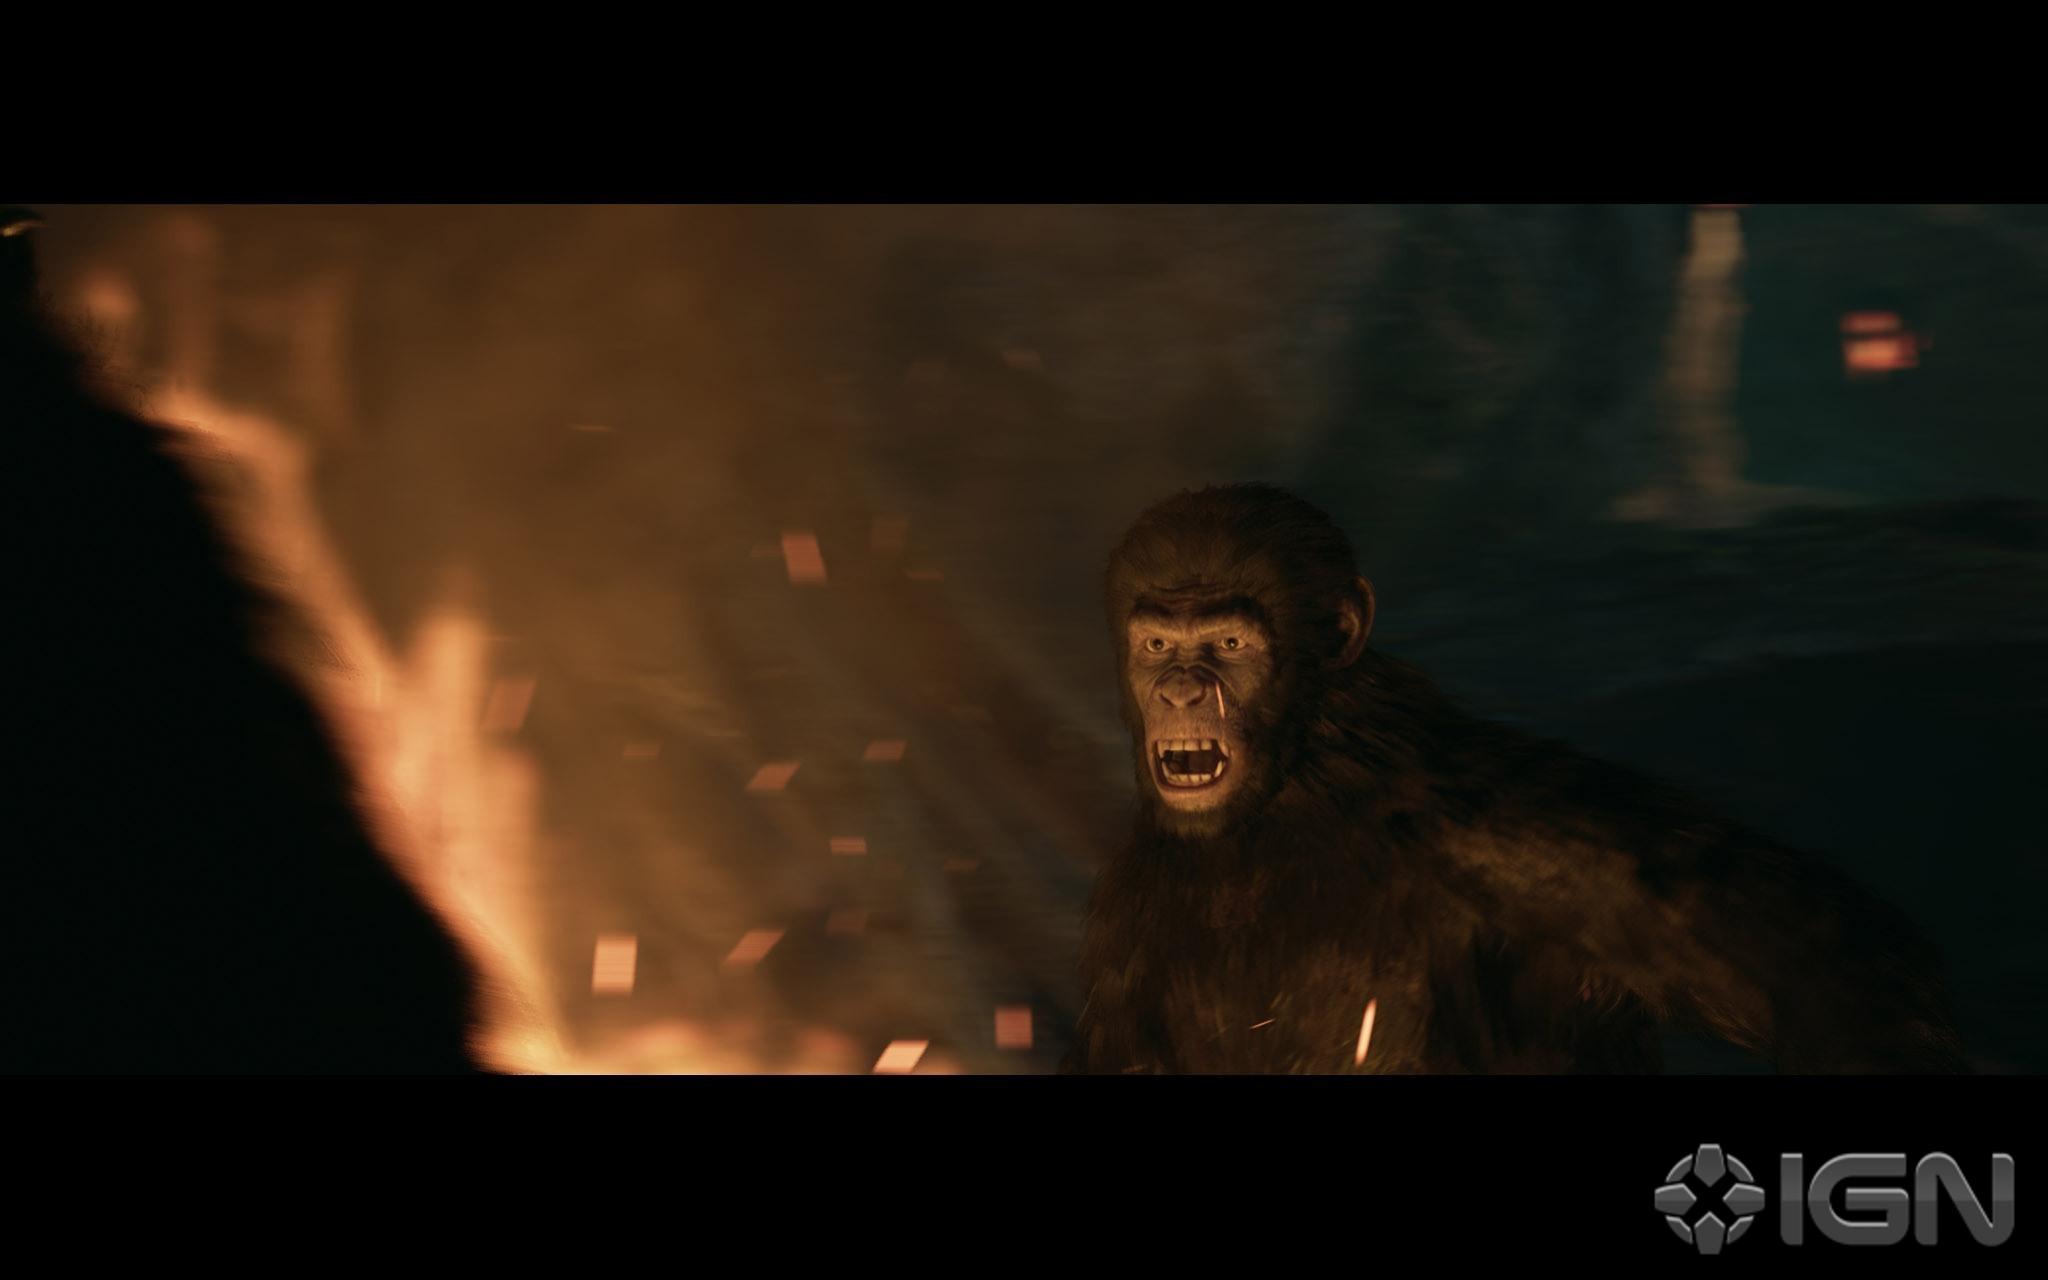 Planet Of The Apes: Last Frontier &#8211; Adventure In The Spirit Of Telltale About Smart Monkeys From The Movie